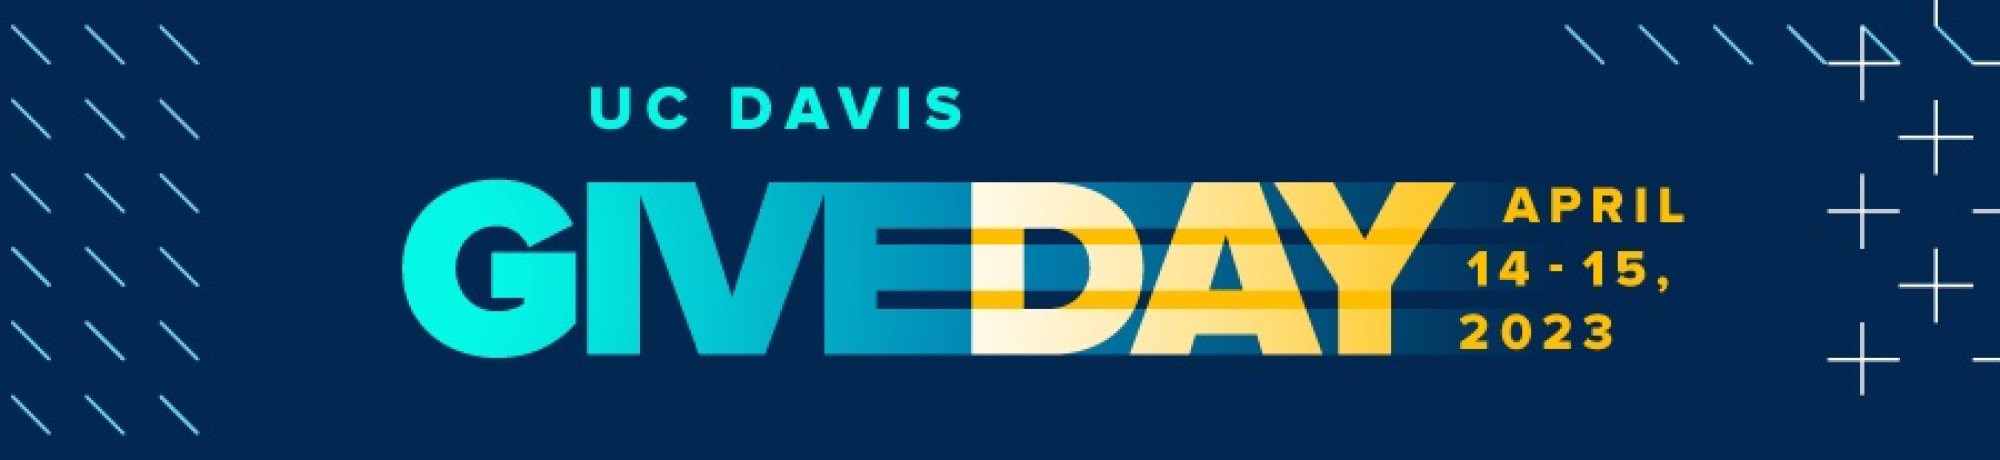 Give Day Banner Image, which reads "UC Davis GIVE DAY April 14-15, 2023"